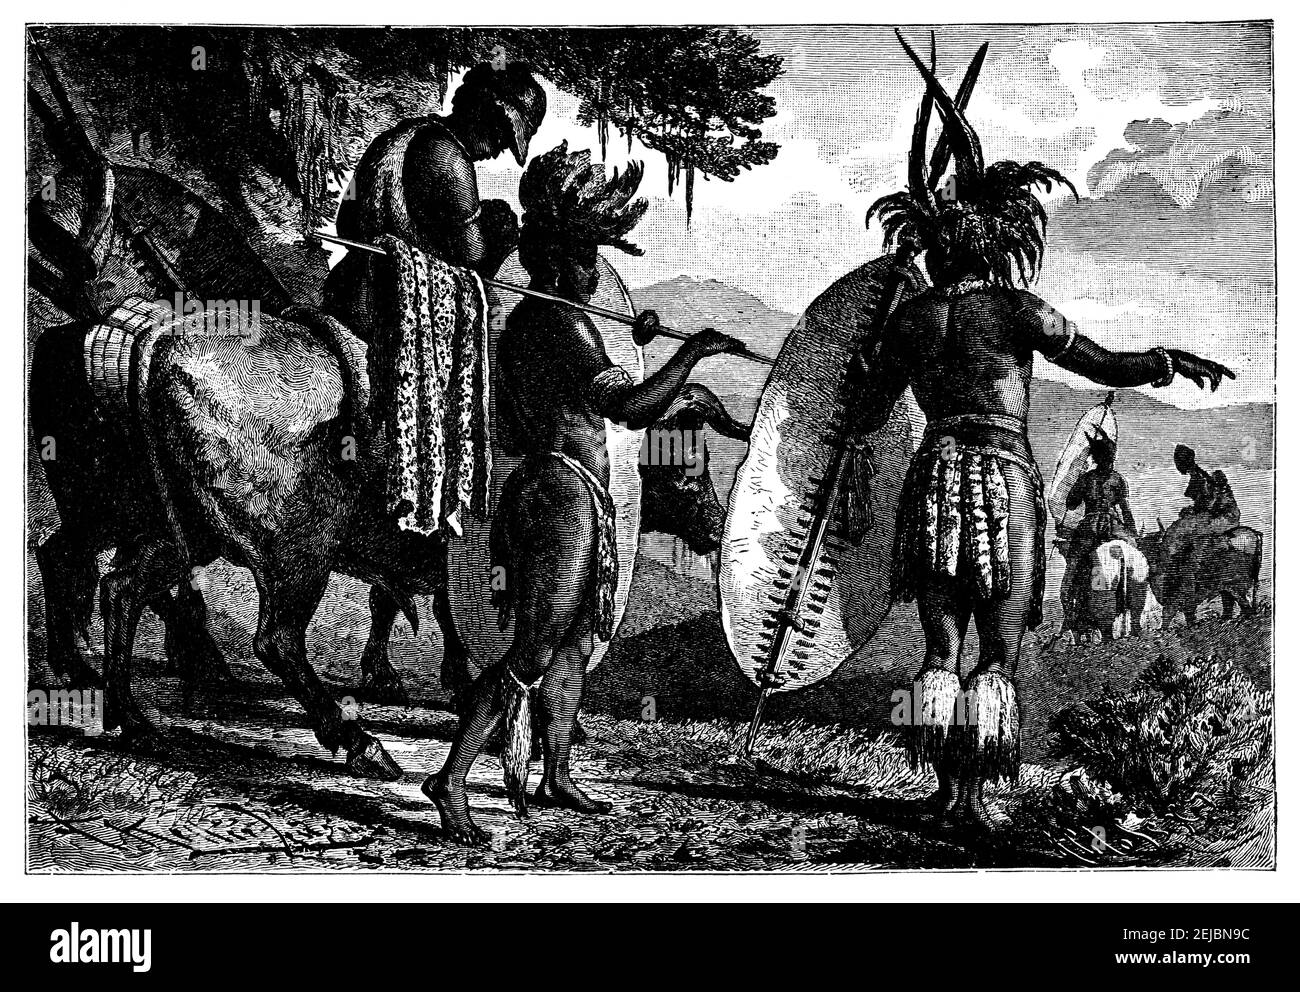 Zulu people warriors on the move.Culture and history of Africa. Vintage antique black and white illustration. 19th century. Stock Photo